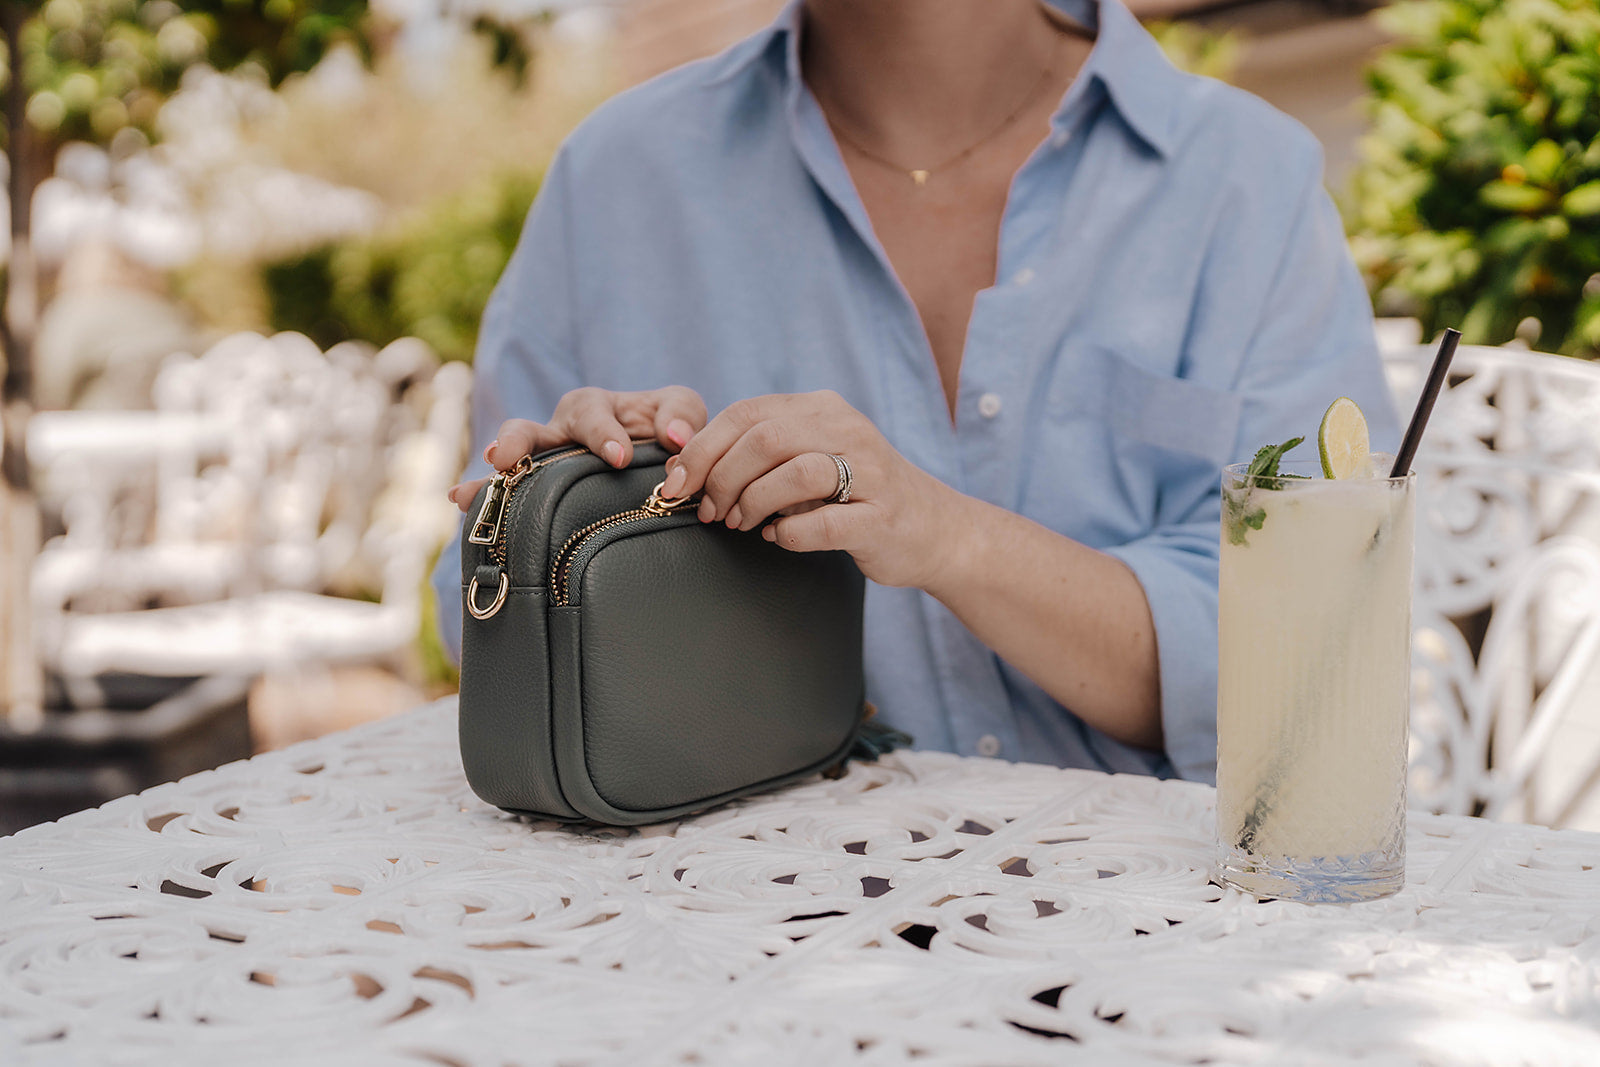 Downton Leather Crossbody Bag in Azure Green on table